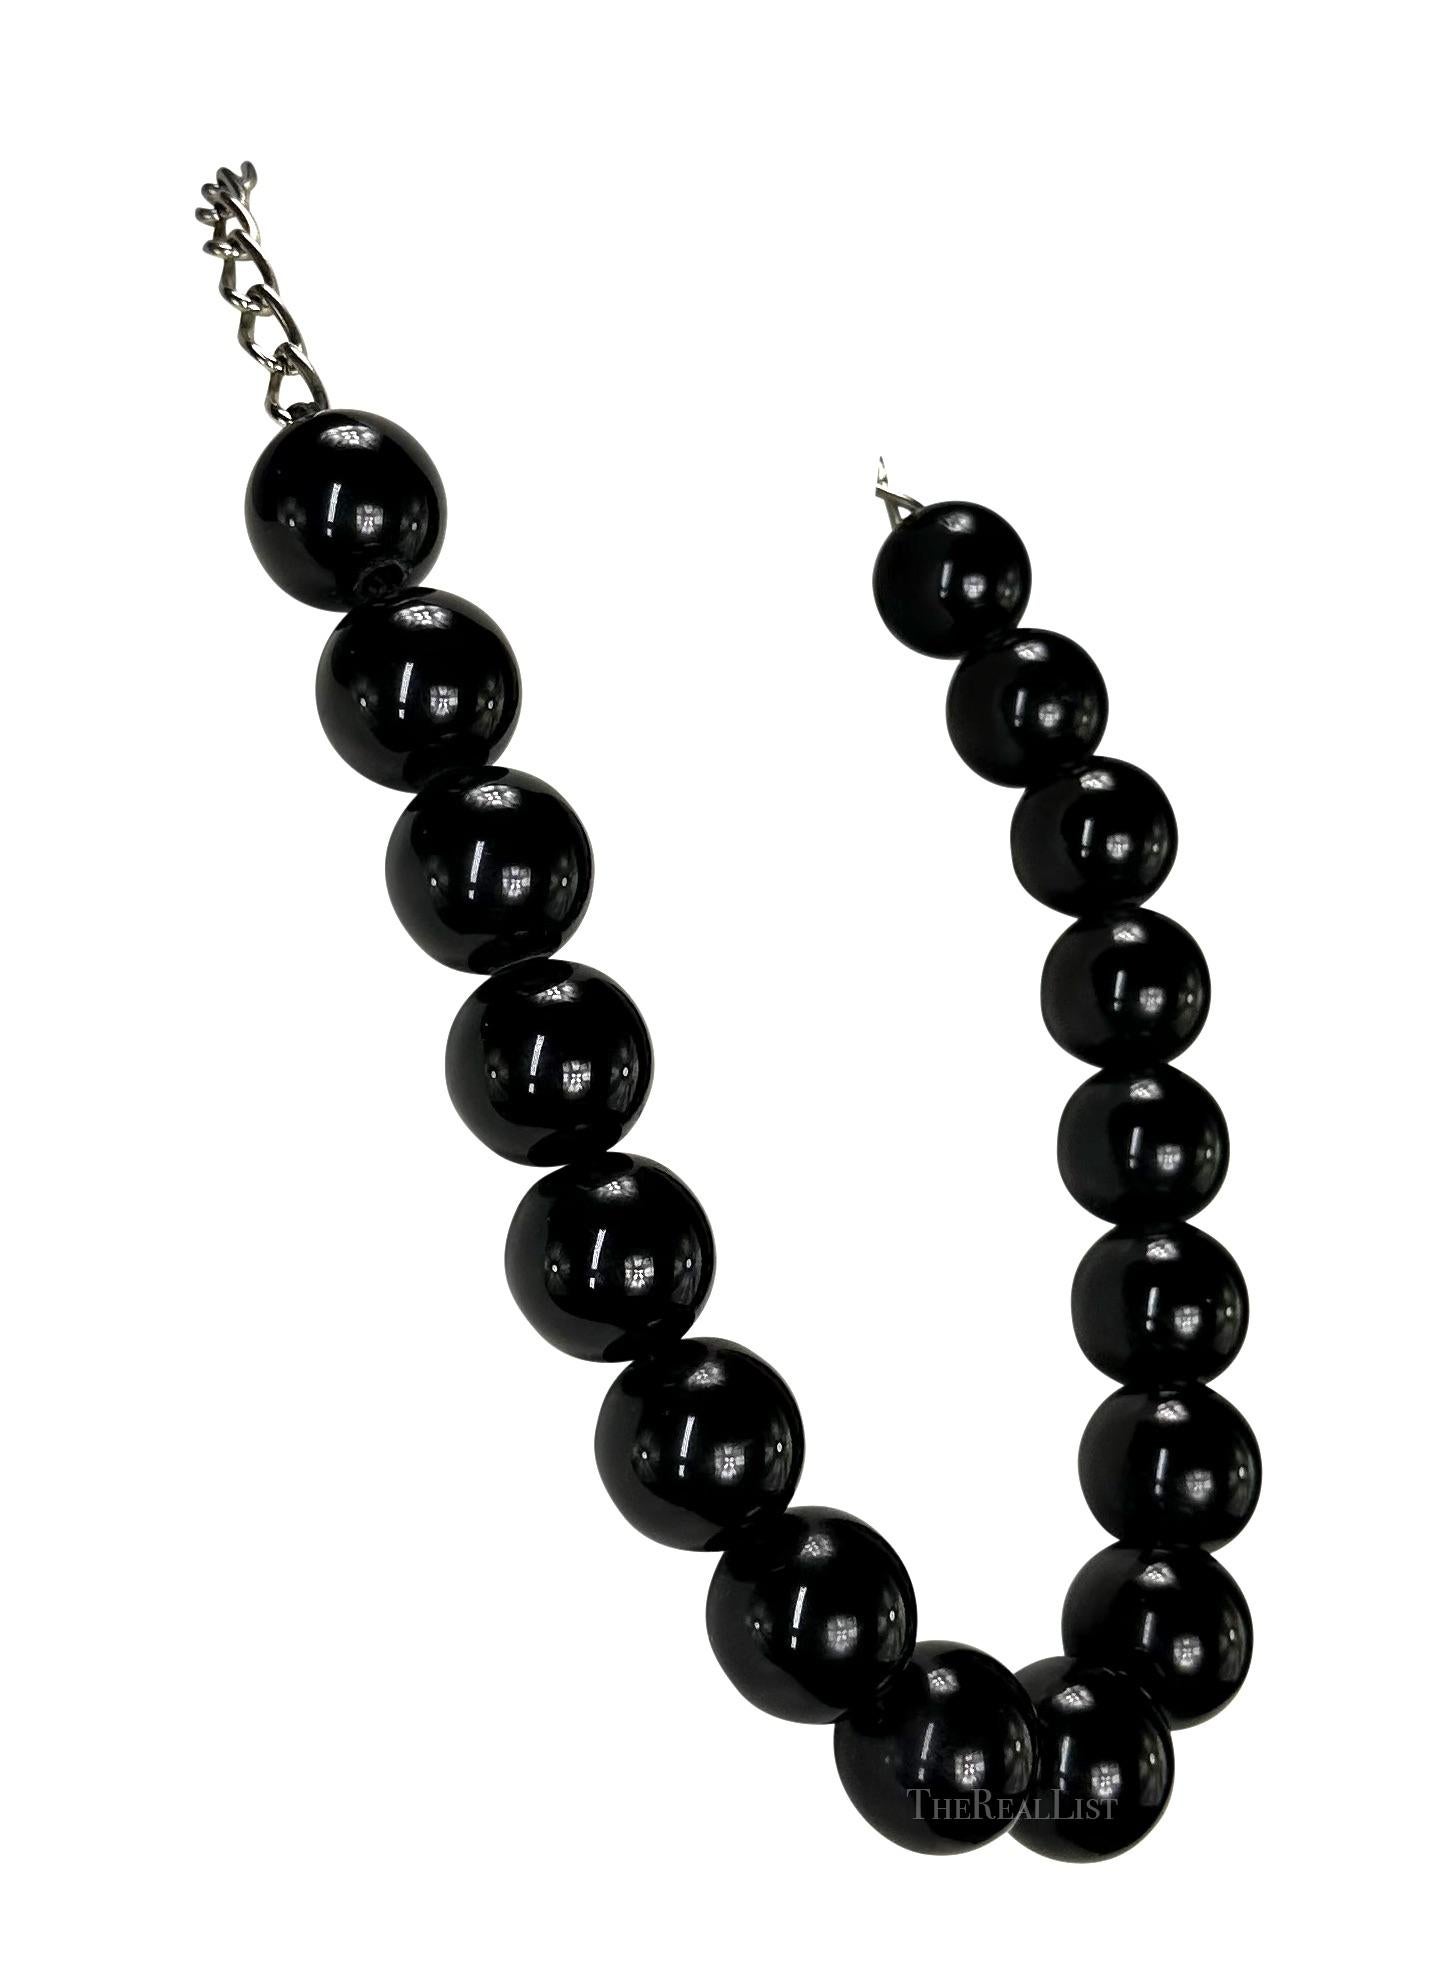 1980s Gianni Versace Oversized Black Lacquer Bead Chain Necklace For Sale 1